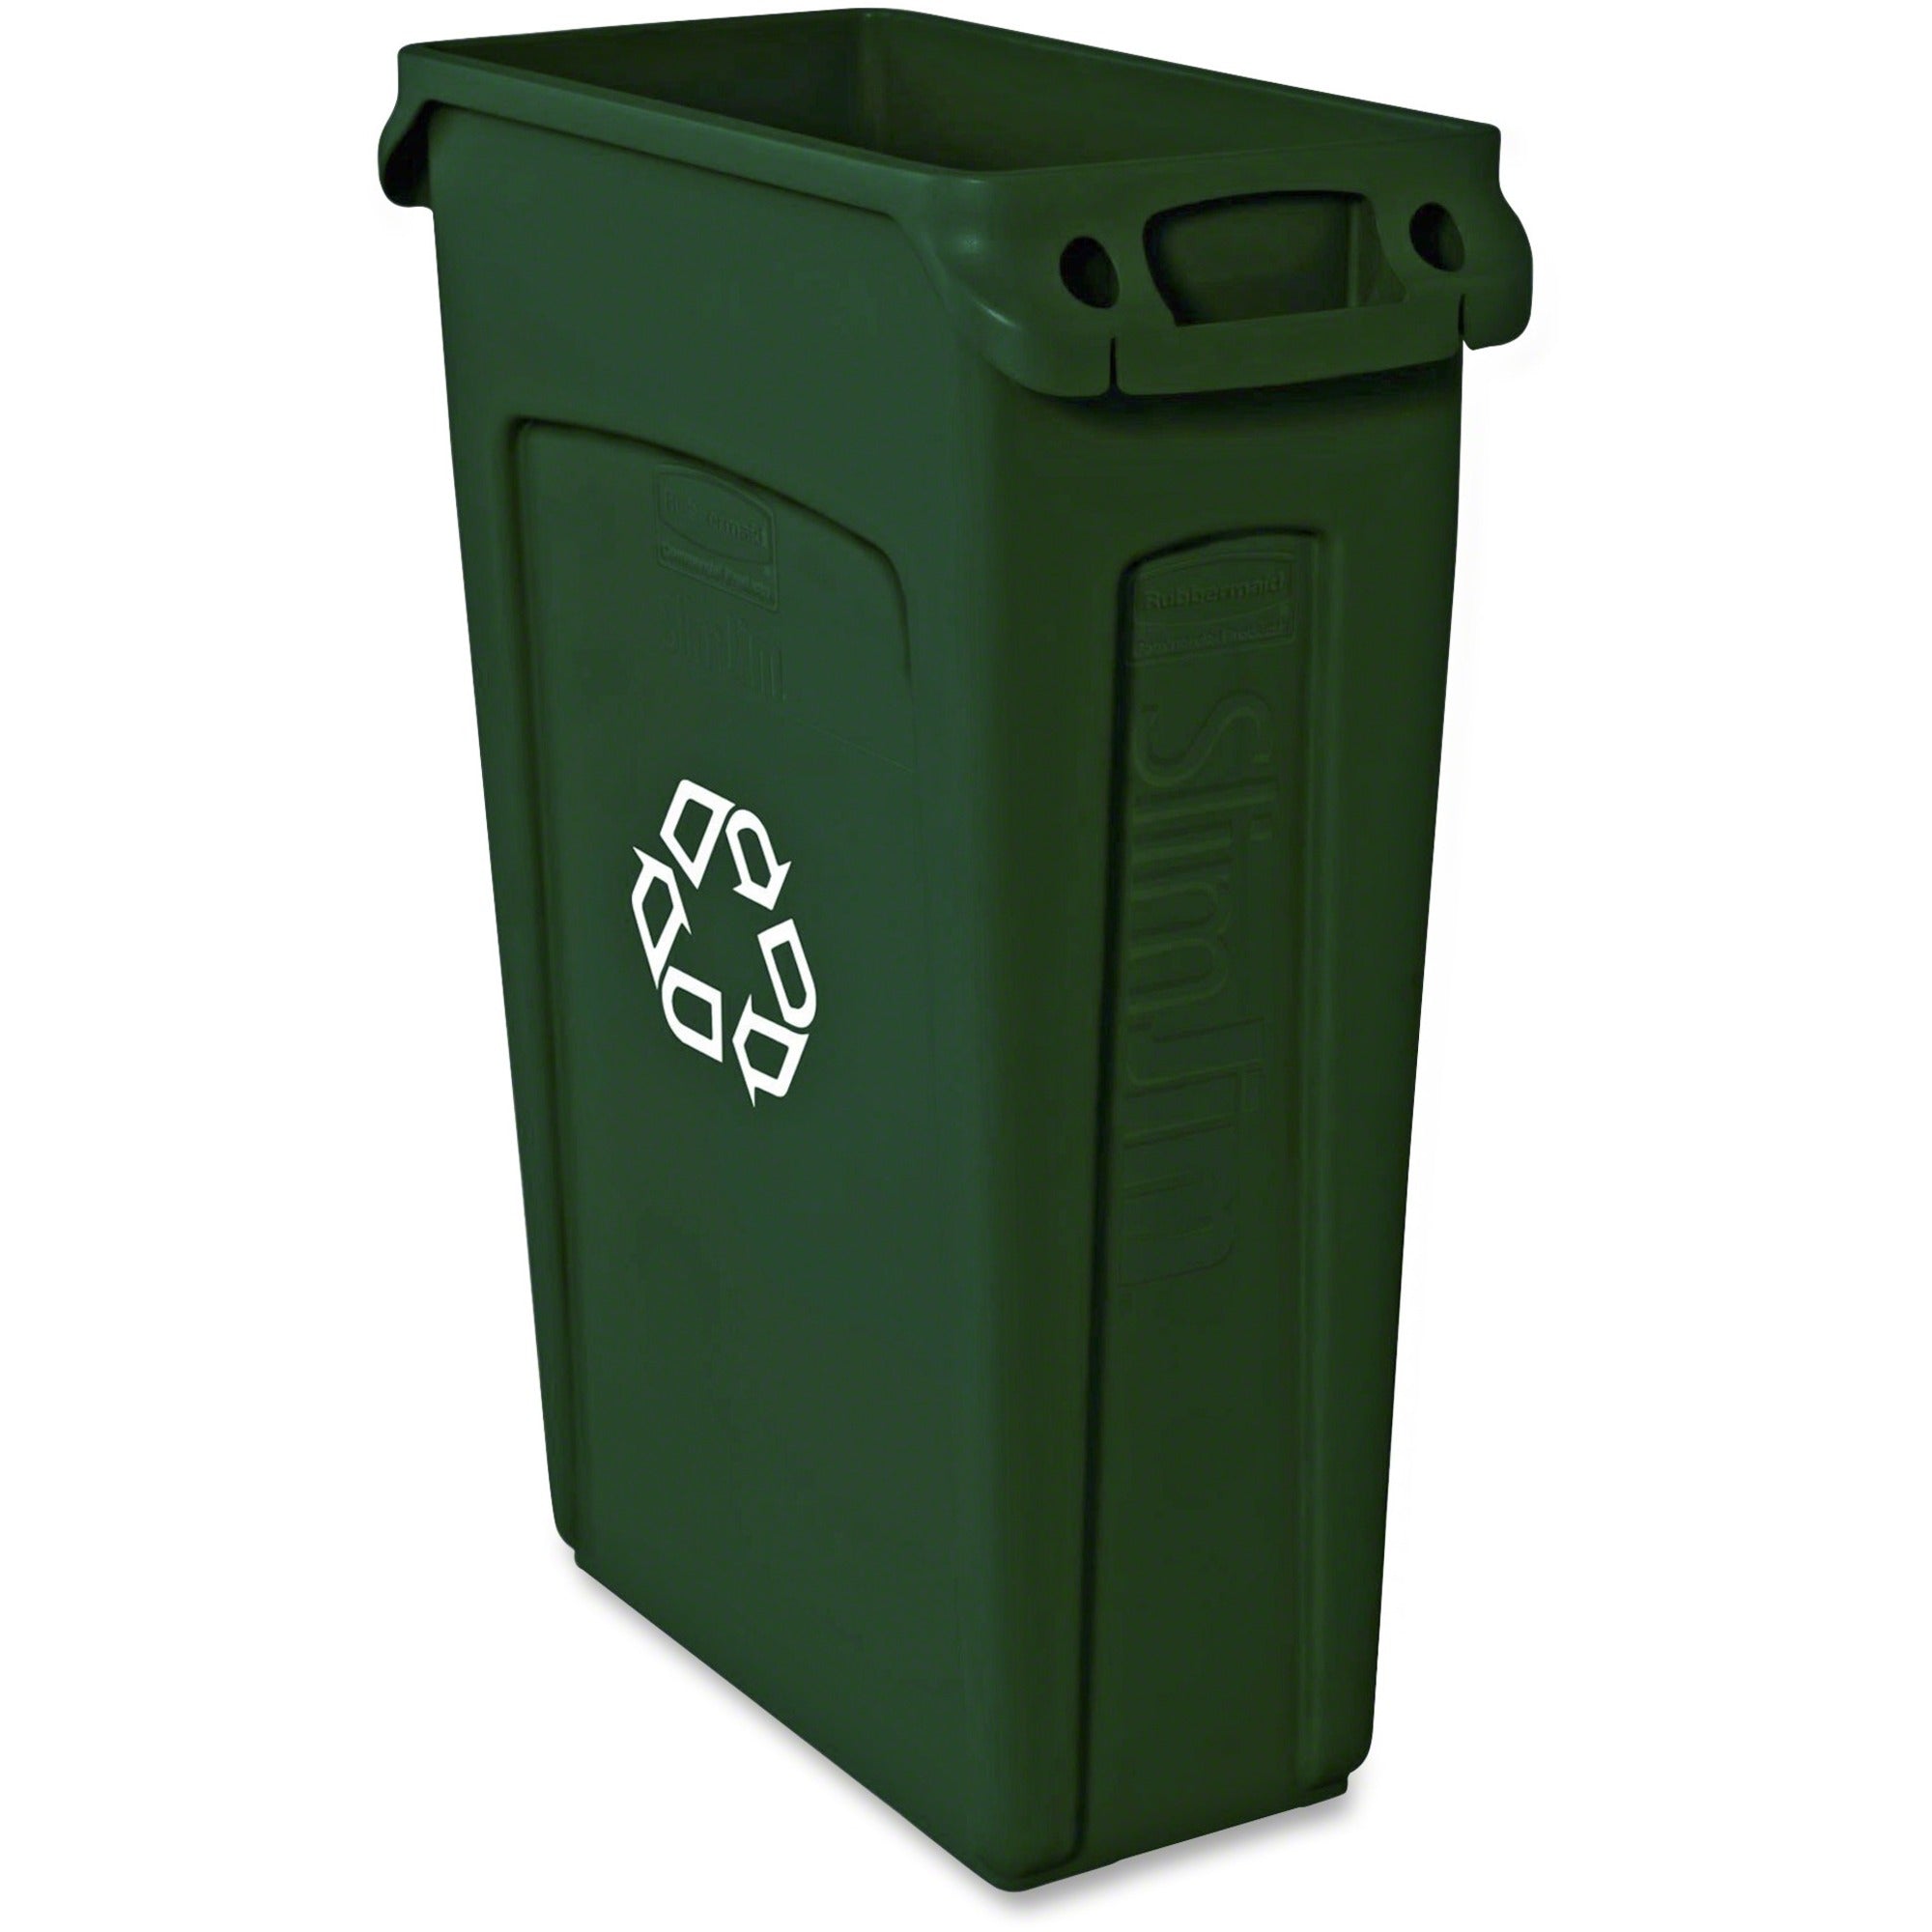 rubbermaid-commercial-slim-jim-23-gallon-vented-recycling-containers-23-gal-capacity-weather-resistant-durable-long-lasting-handle-lightweight-sturdy-plastic-green-4-carton_rcp354007gnct - 1